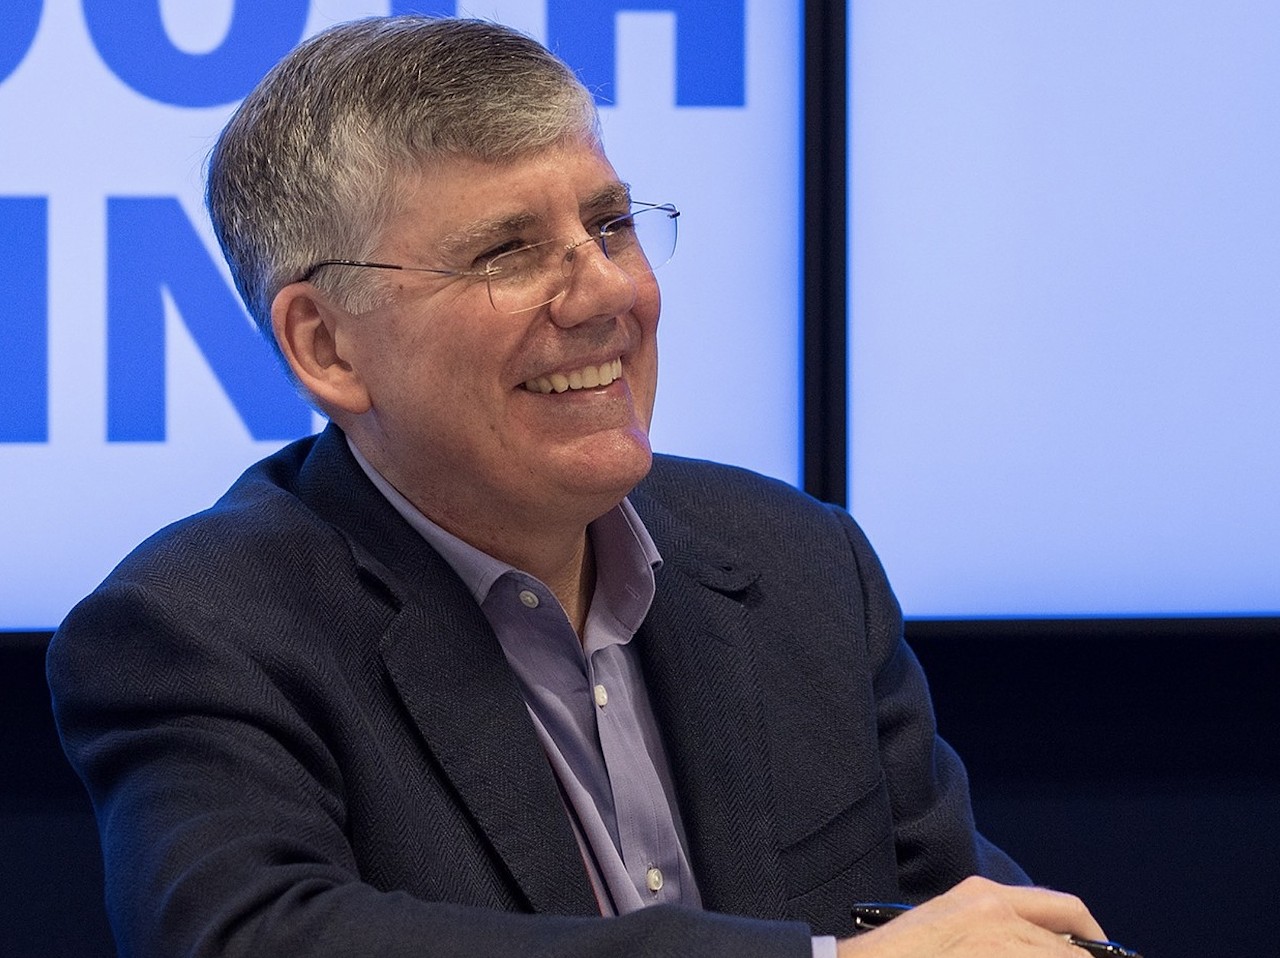 Rick Riordan
You may know Rick Riordan for his Percy Jackson and the Olympians book series, but did you know the author's a tried and true San Antonian? Born and raised in the Alamo City, Riordan went to Alamo Heights High School before heading to college at North Texas State University (now UNT). He transferred to UT Austin to study English and History, then came back to San Antonio and nabbed a teaching certification at UTSA.